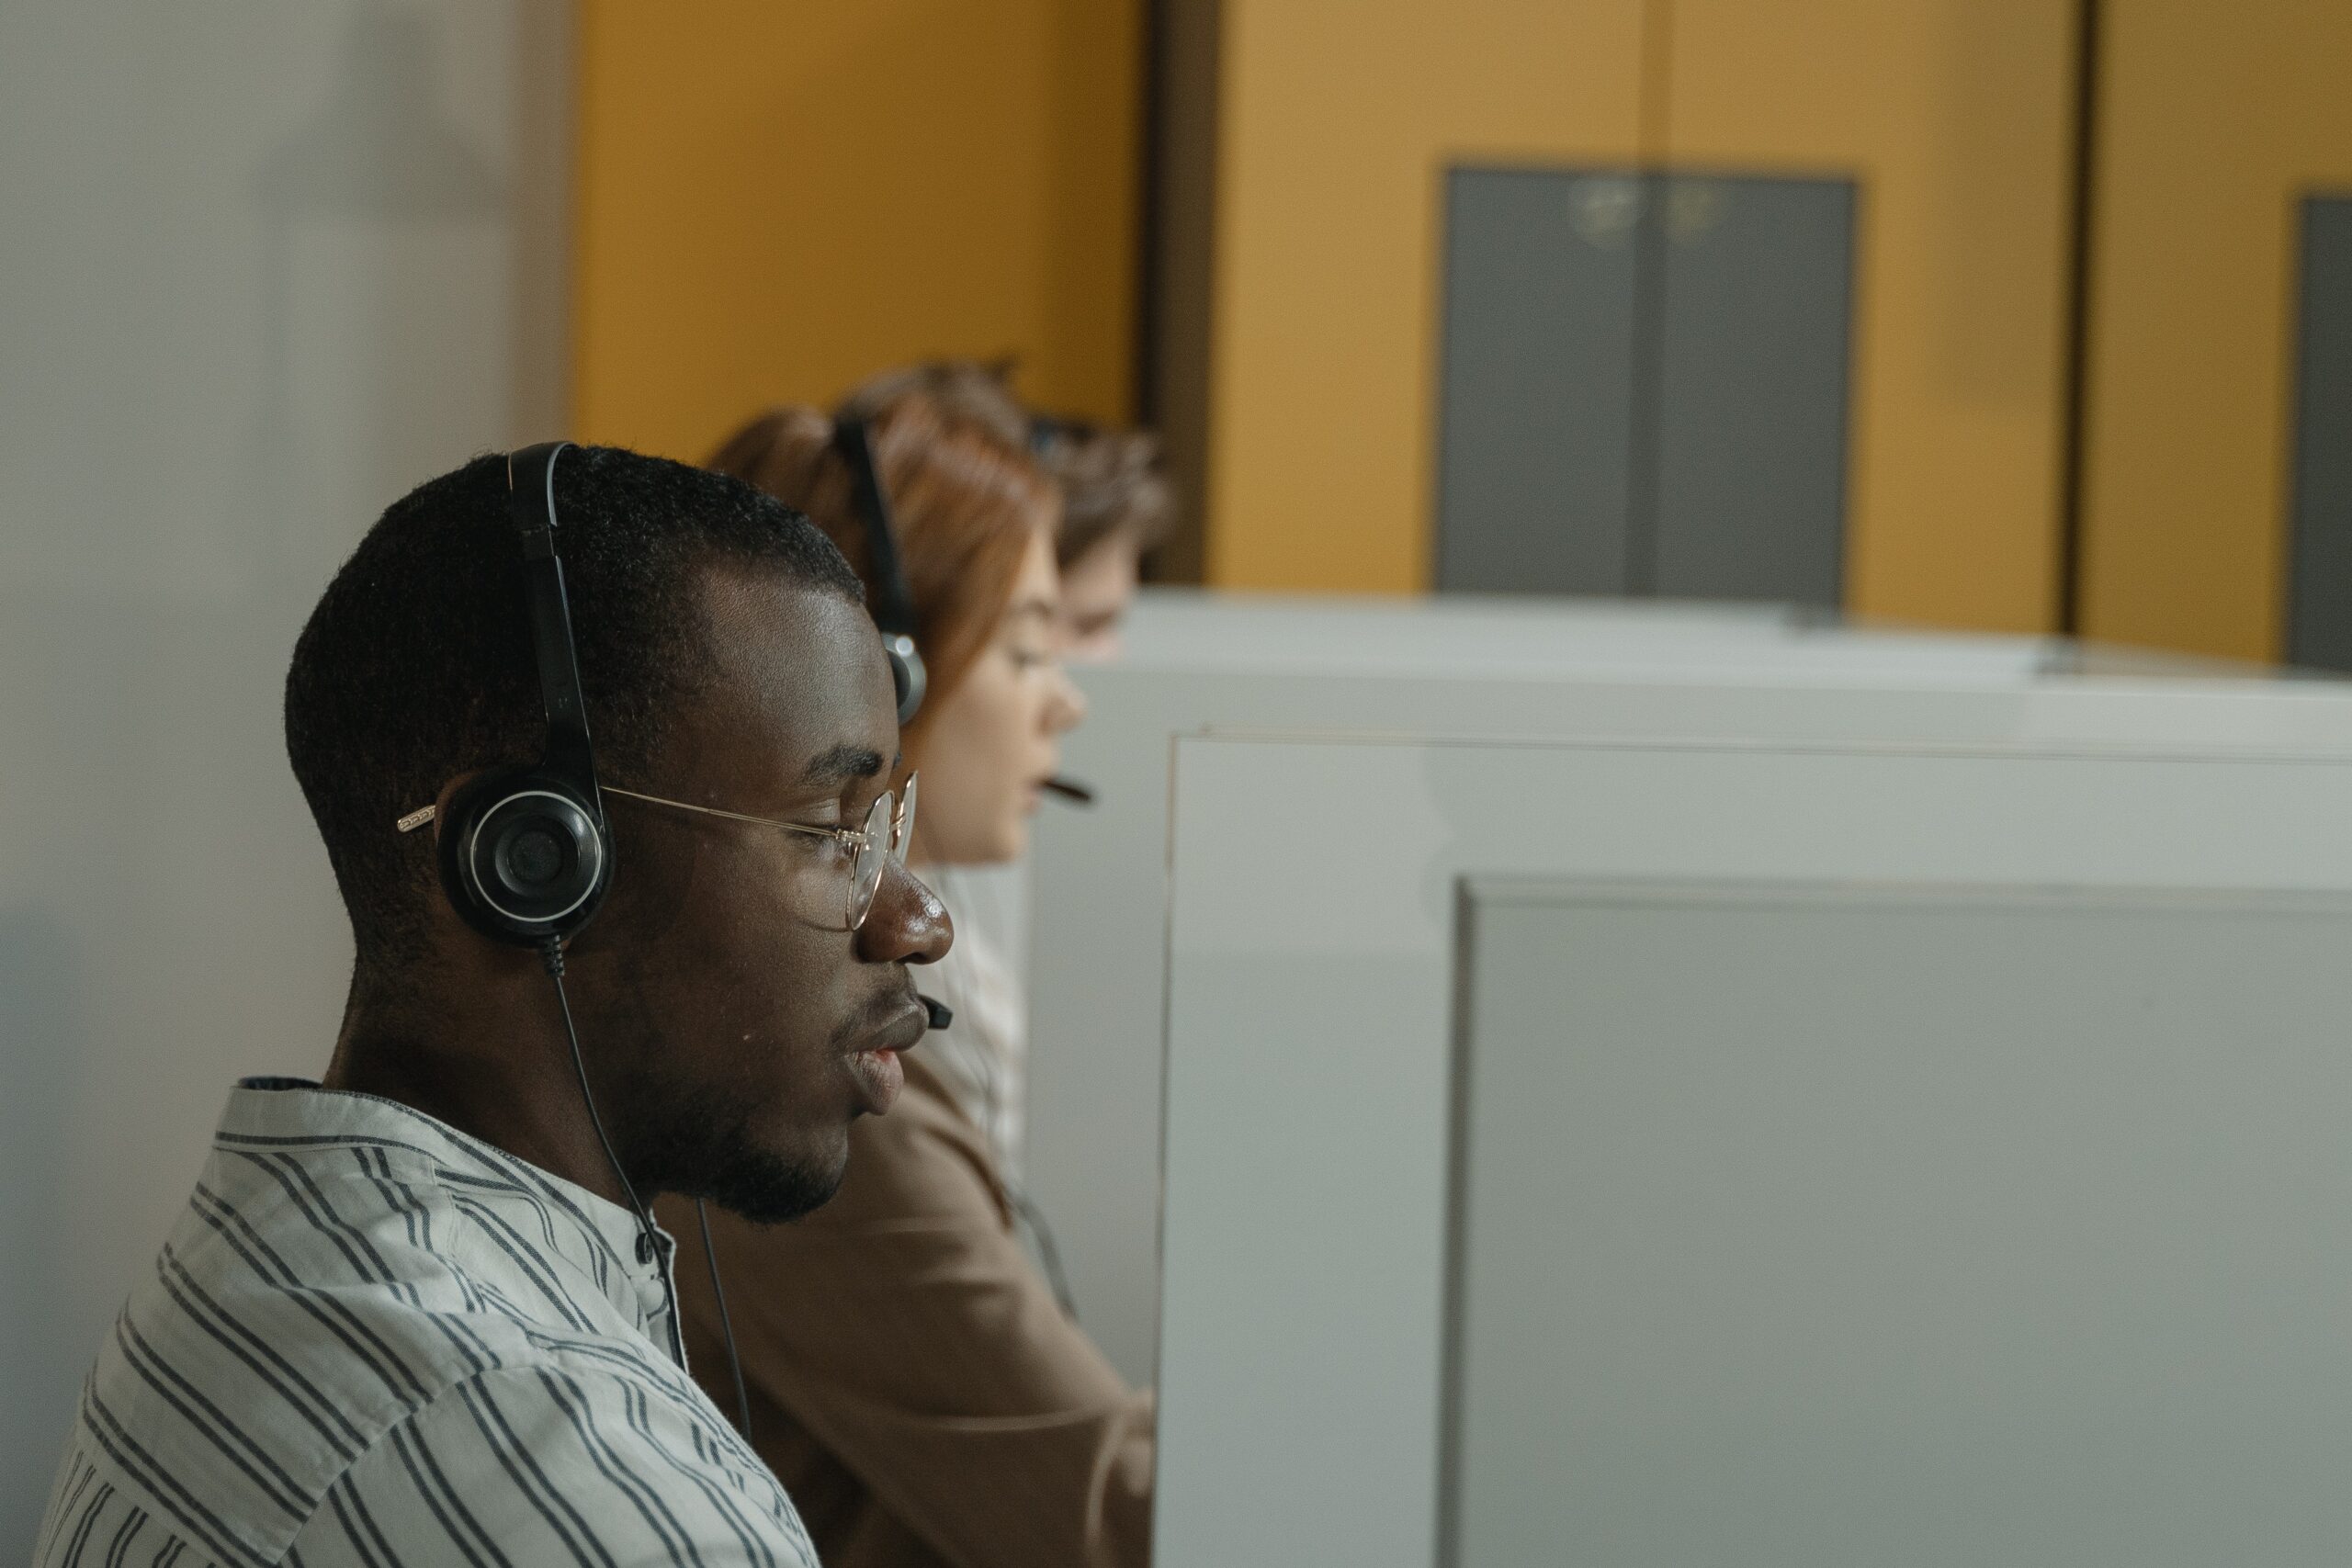 Industries That Typically Use Call Centers